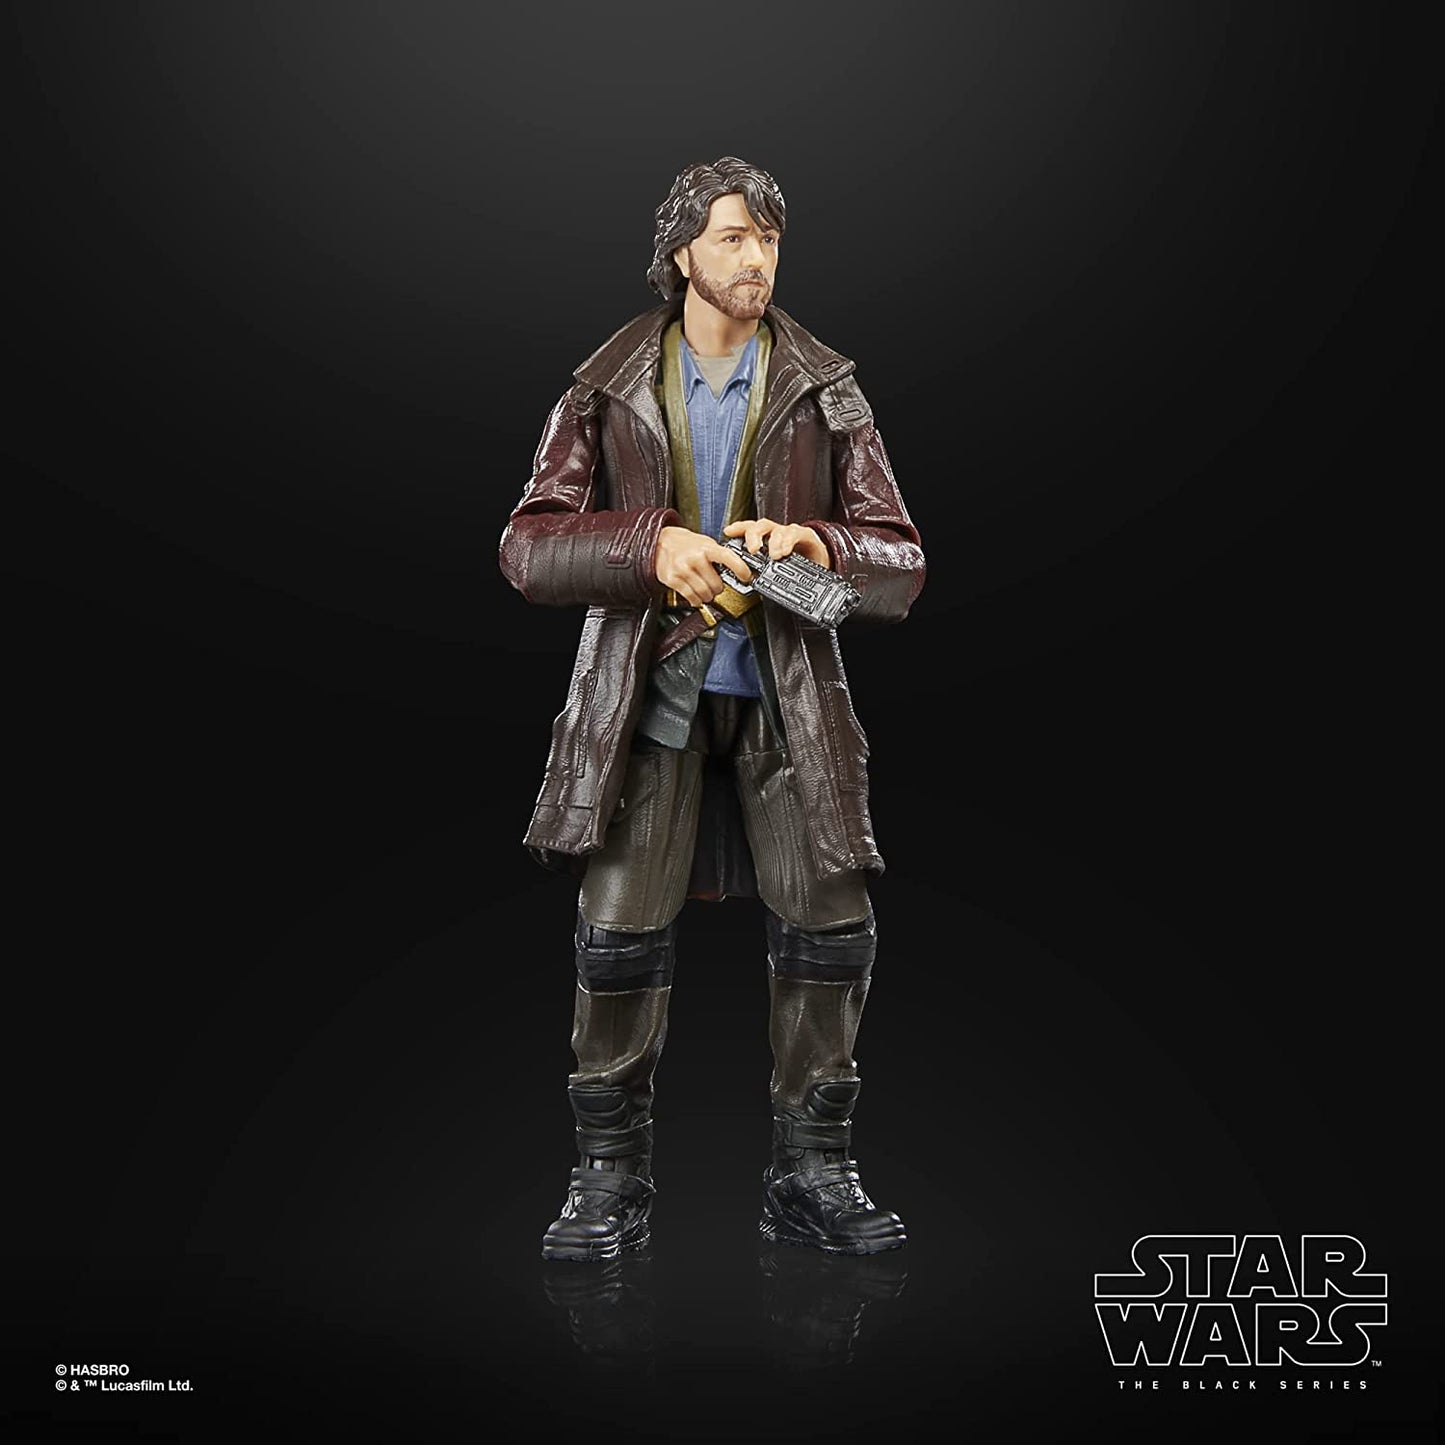 Star Wars The Black Series Cassian Andor (Andor) 6-Inch Action Figure